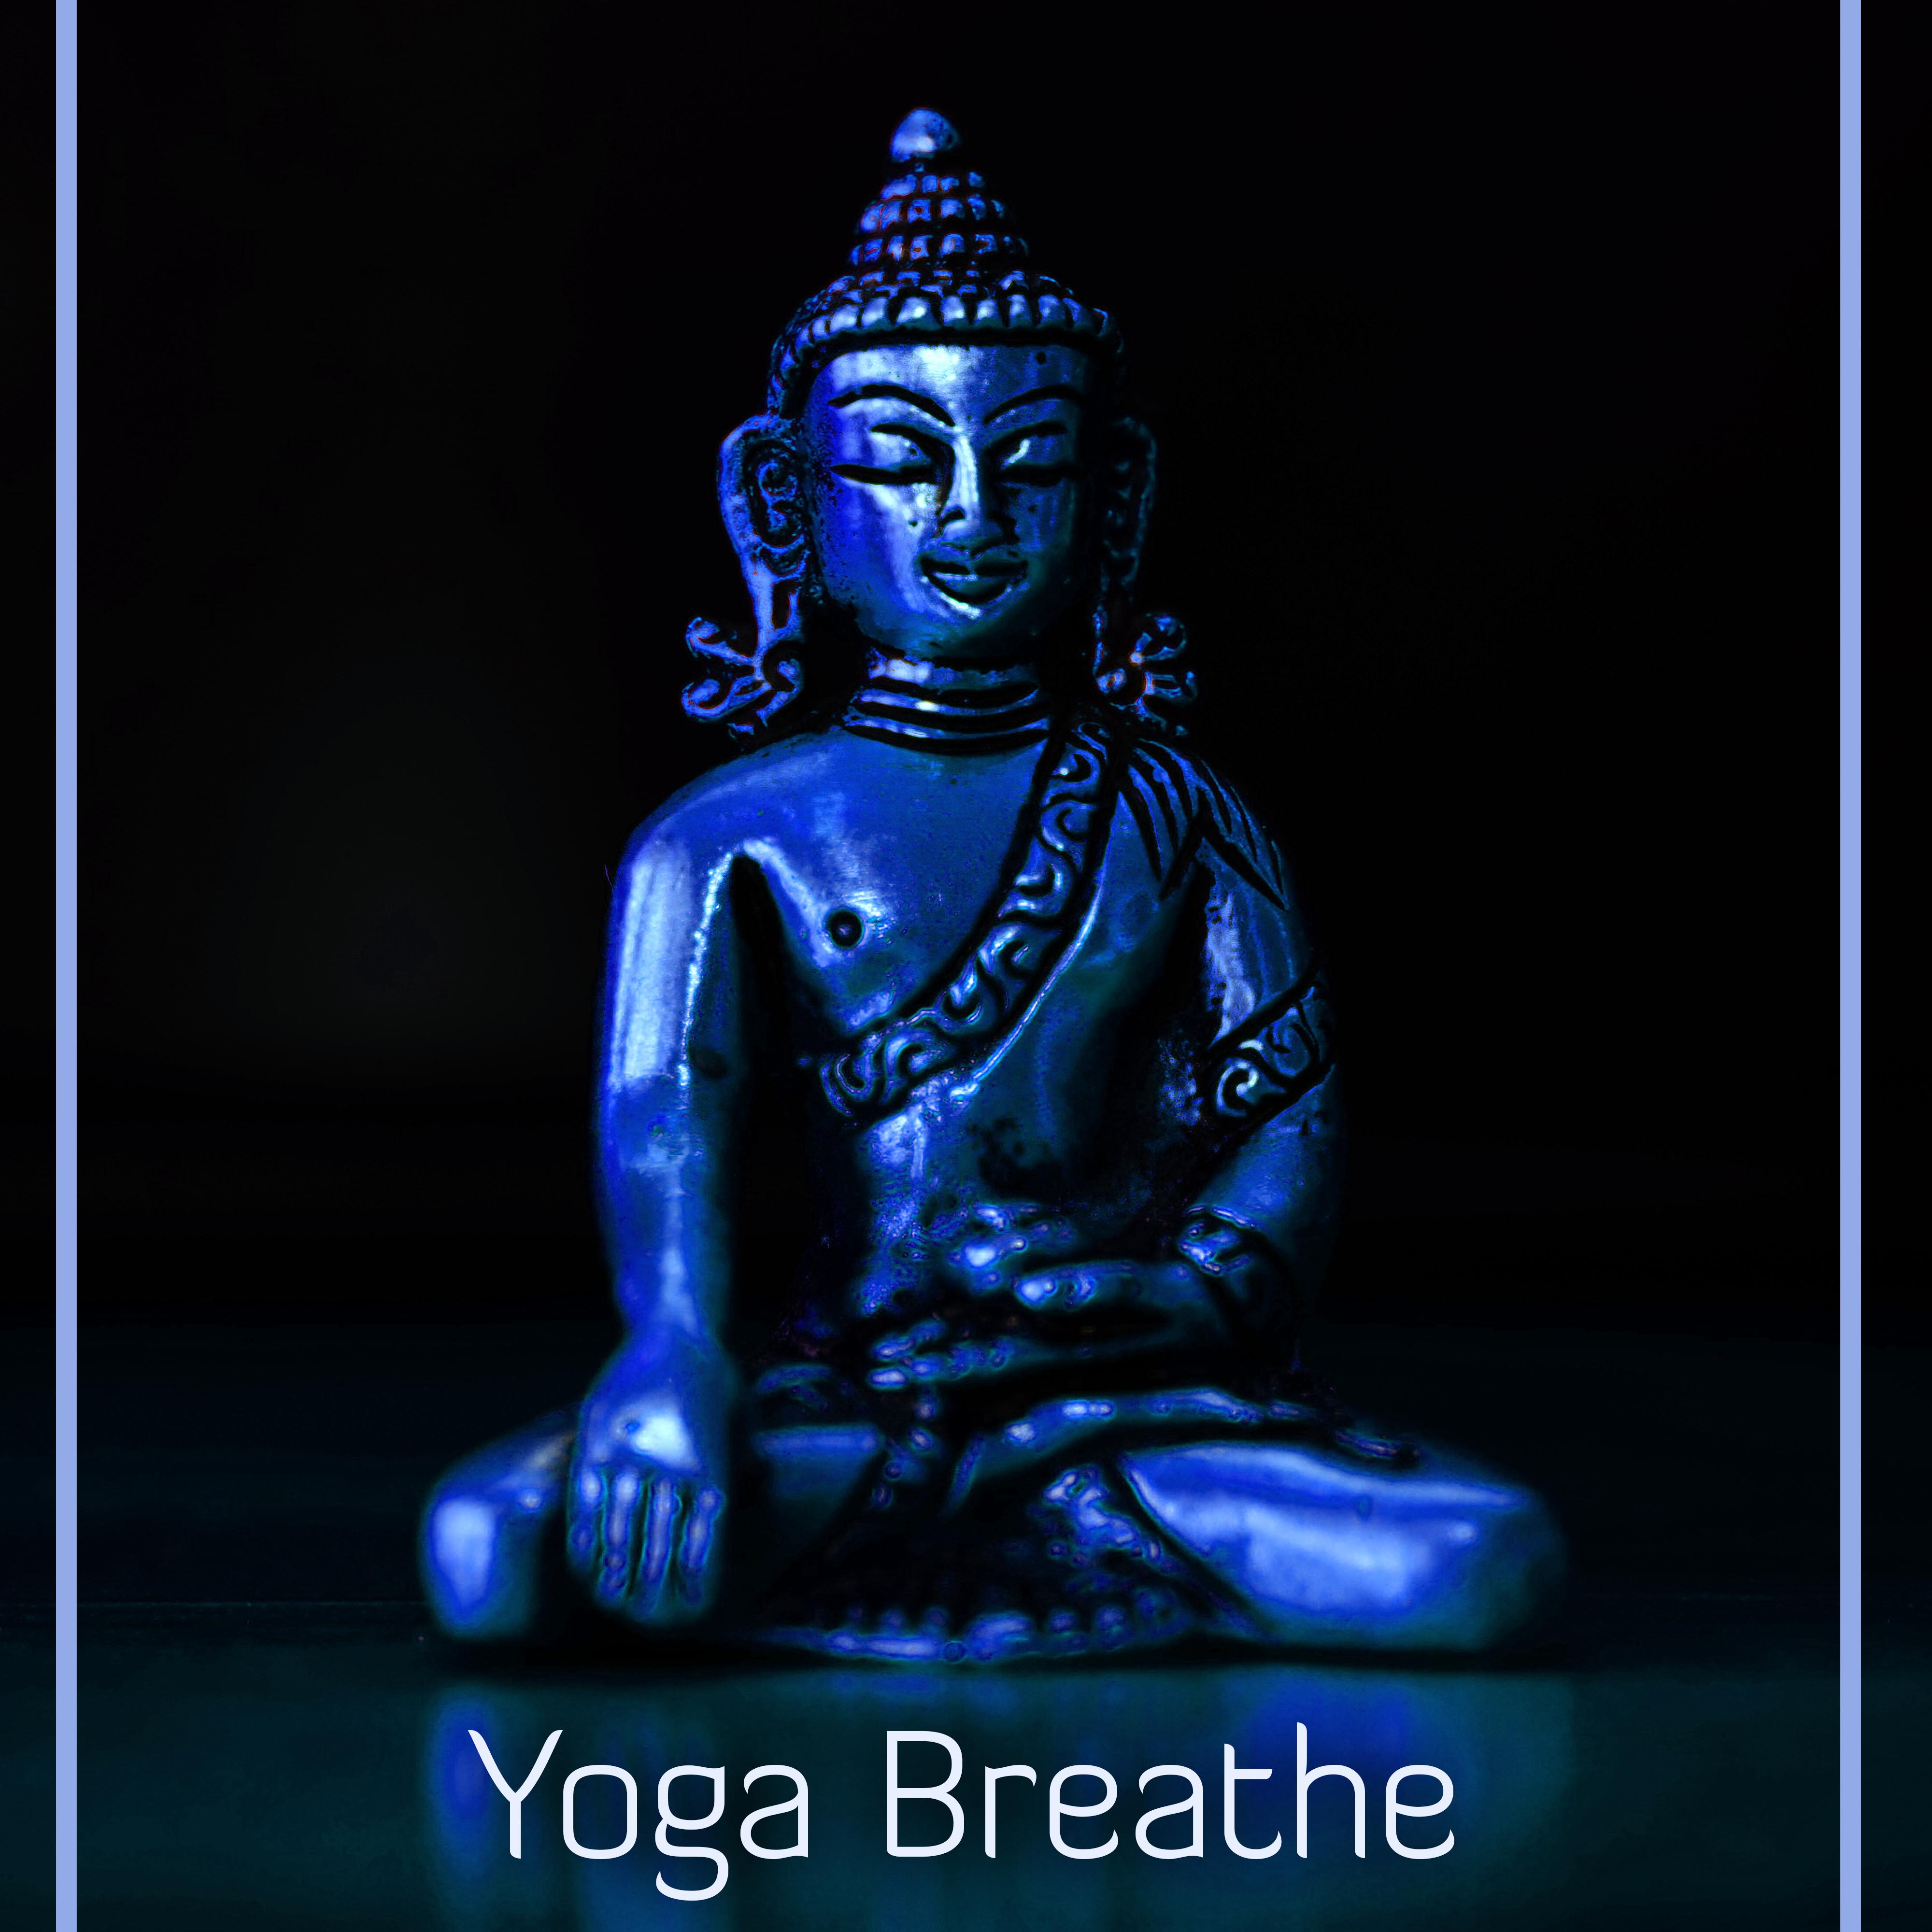 Yoga Breathe – Peaceful Sounds of Nature, Relaxing Nature Music, Perfect for Yoga Practice, Pilates, Meditation